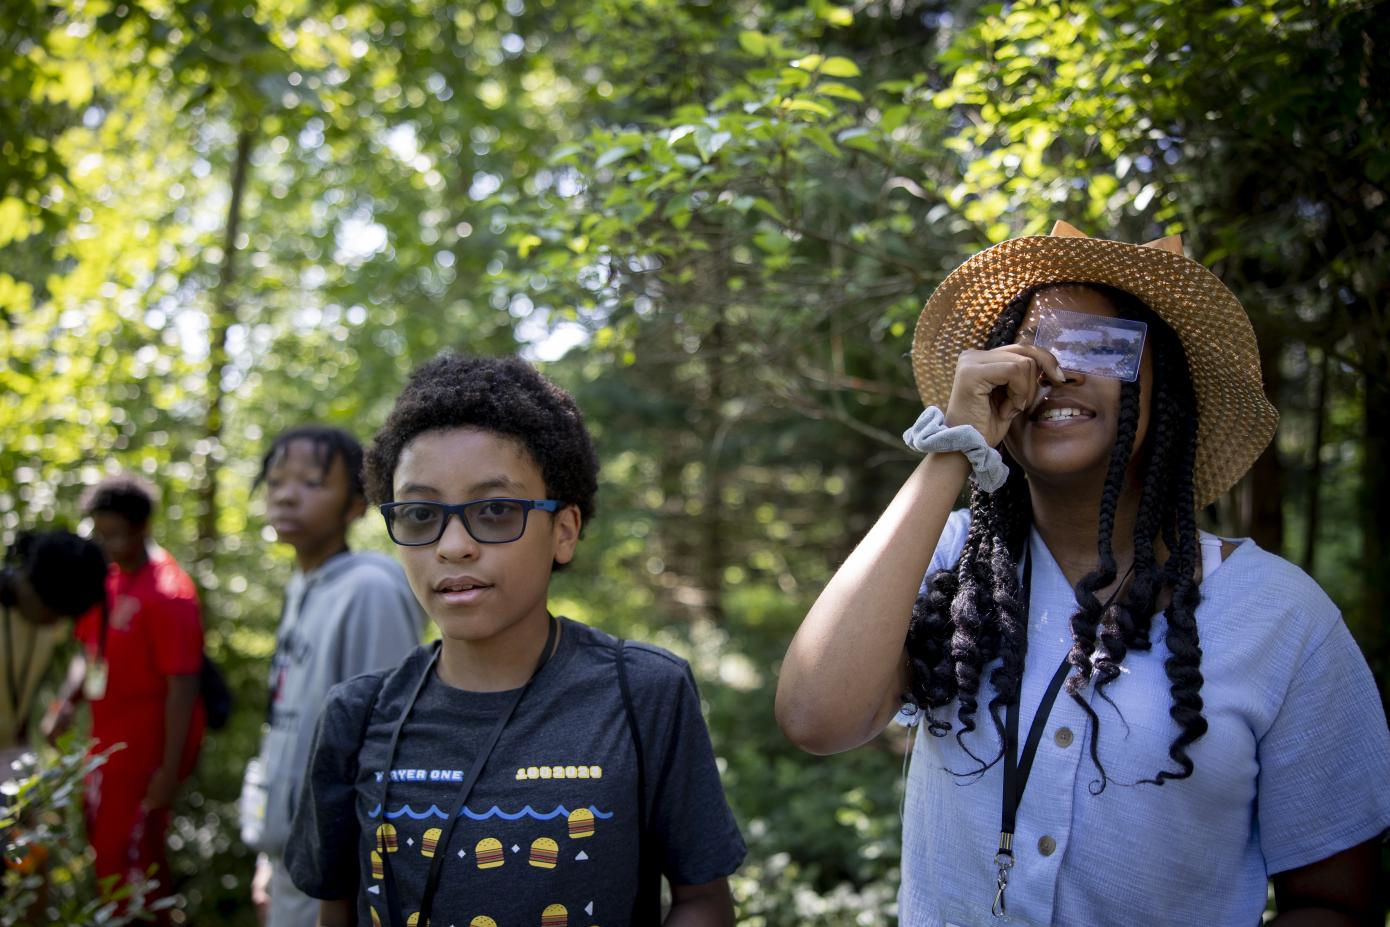 Two students on a tour of the botanical garden